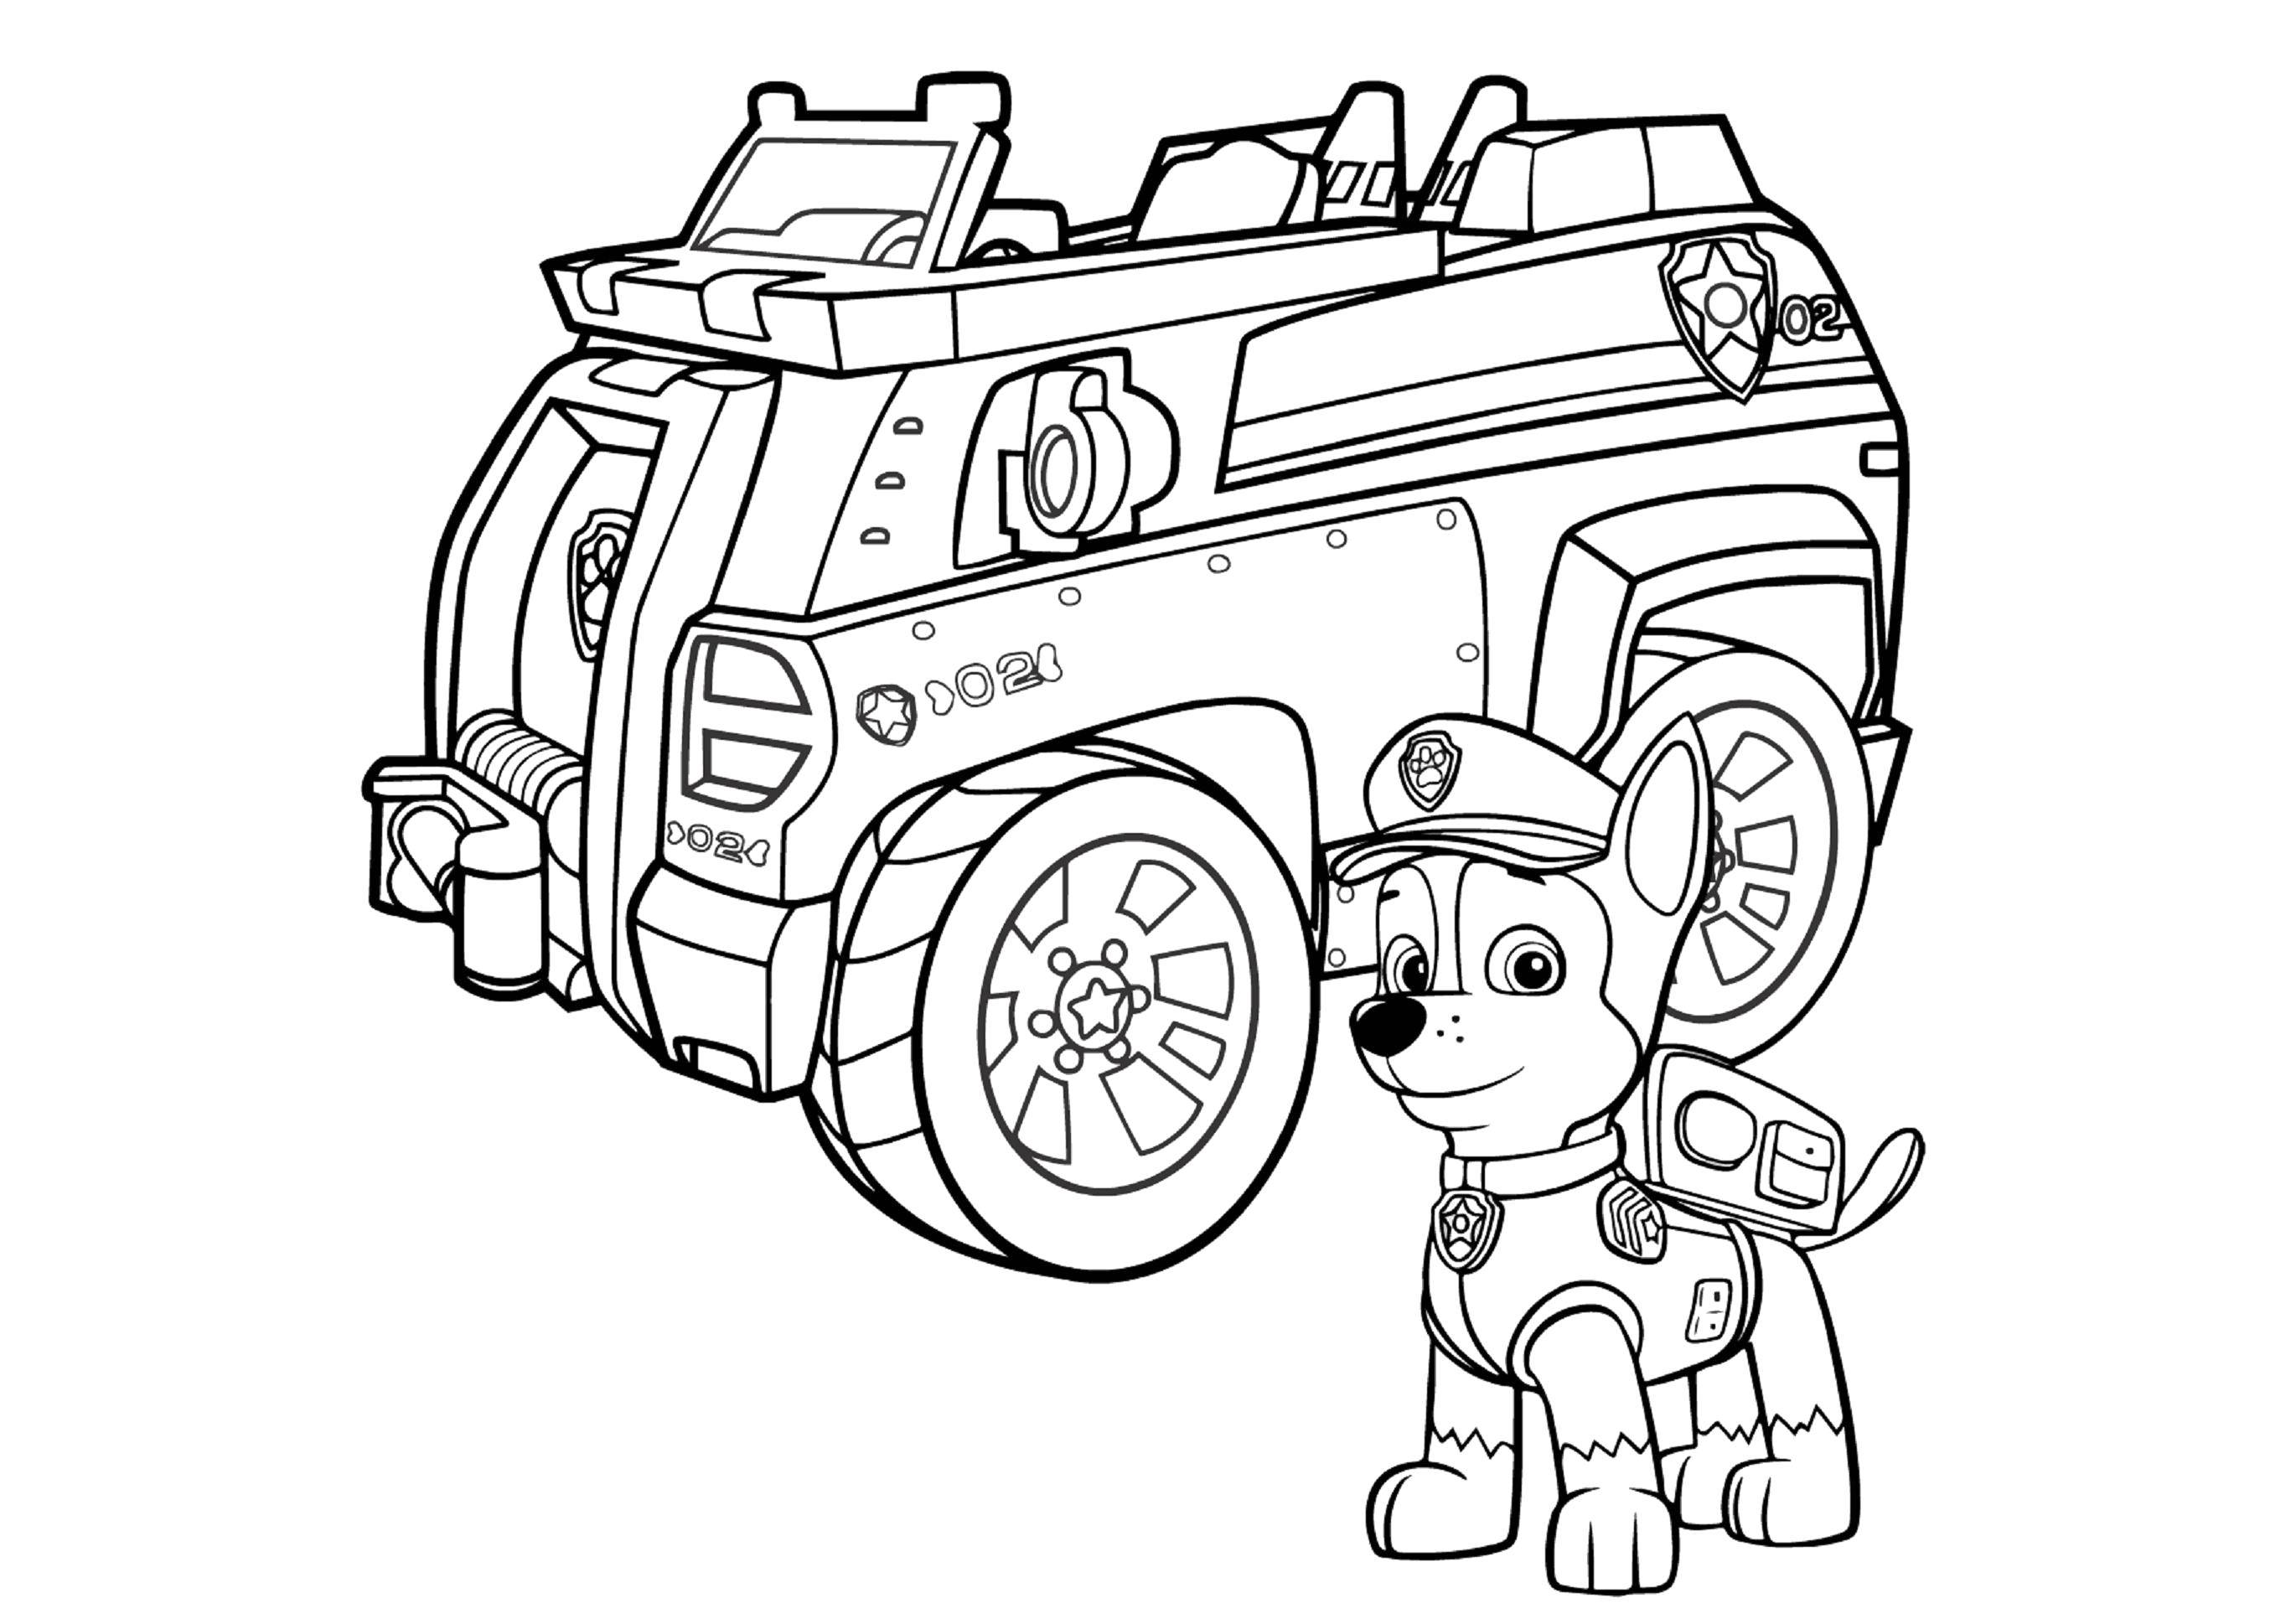 Coloring Chase. Category paw patrol. Tags:  Paw patrol.